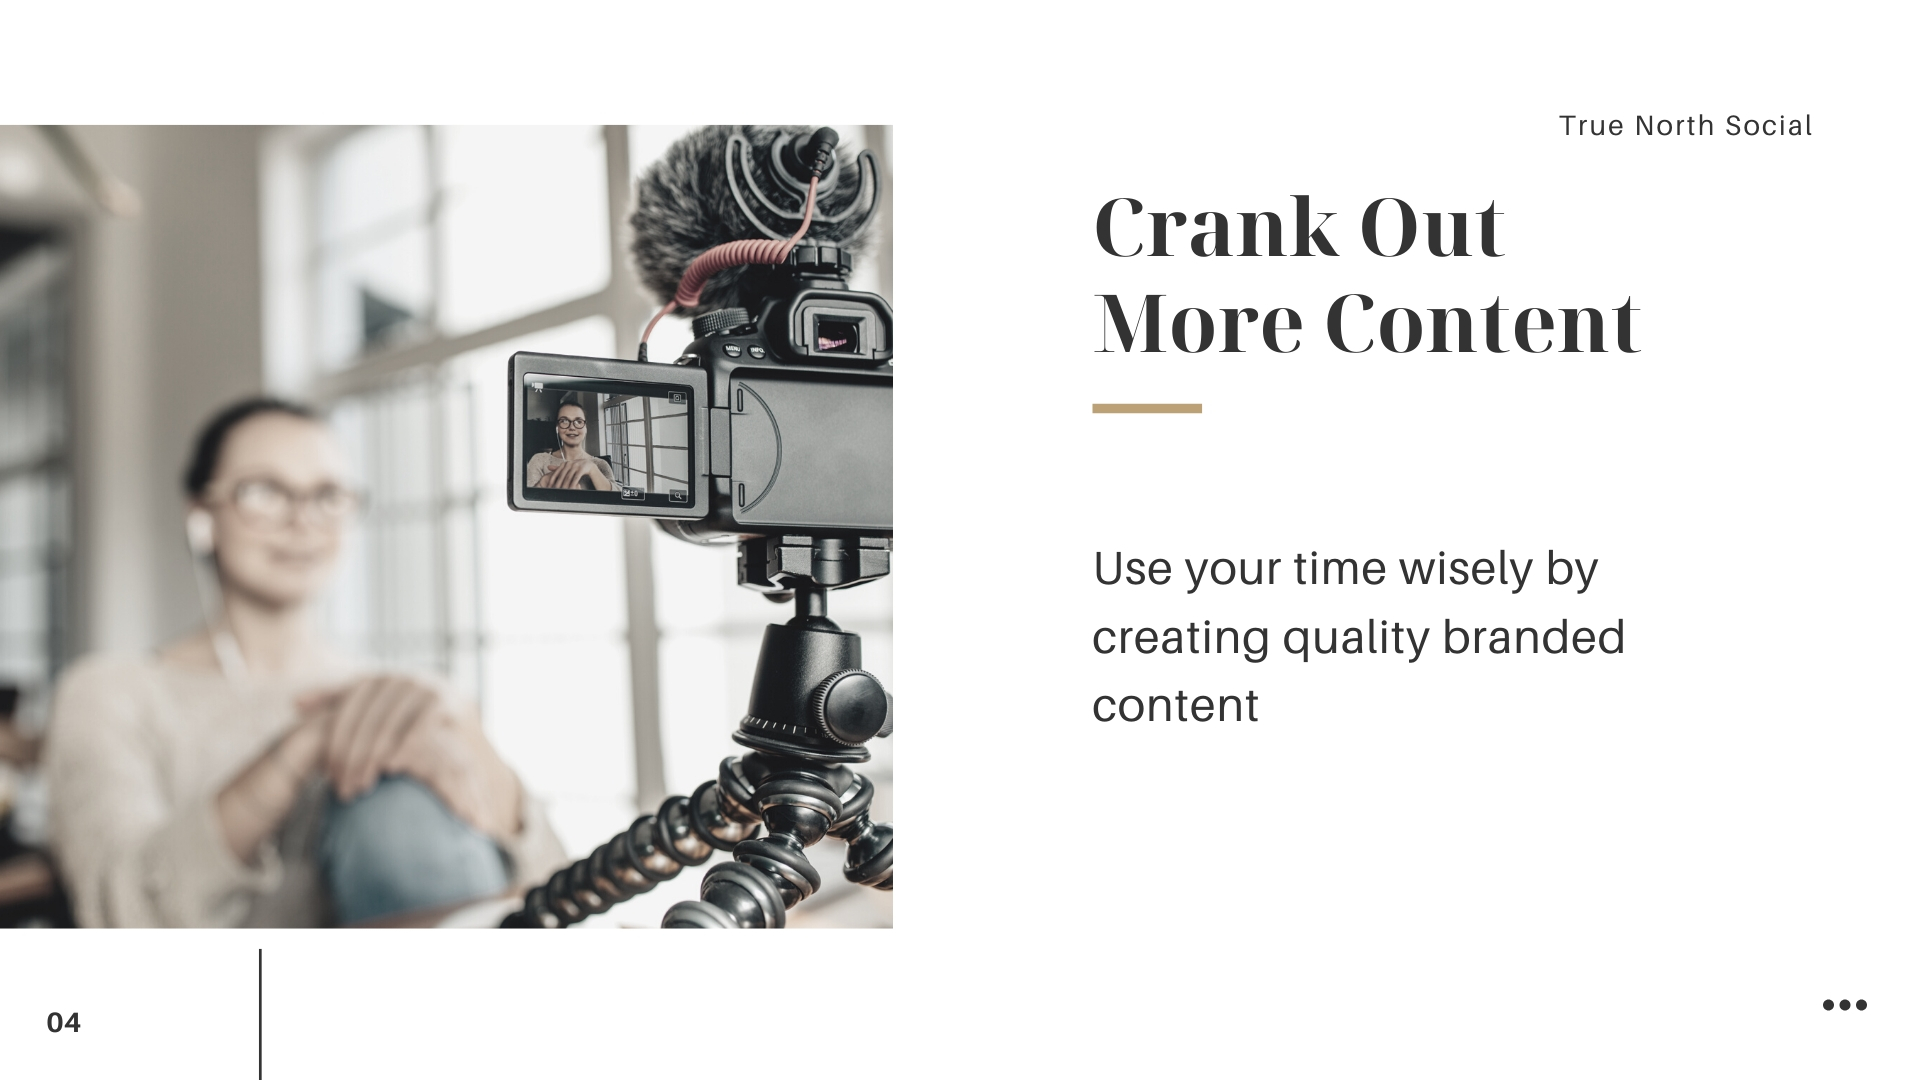 Use slower times to crank out content 